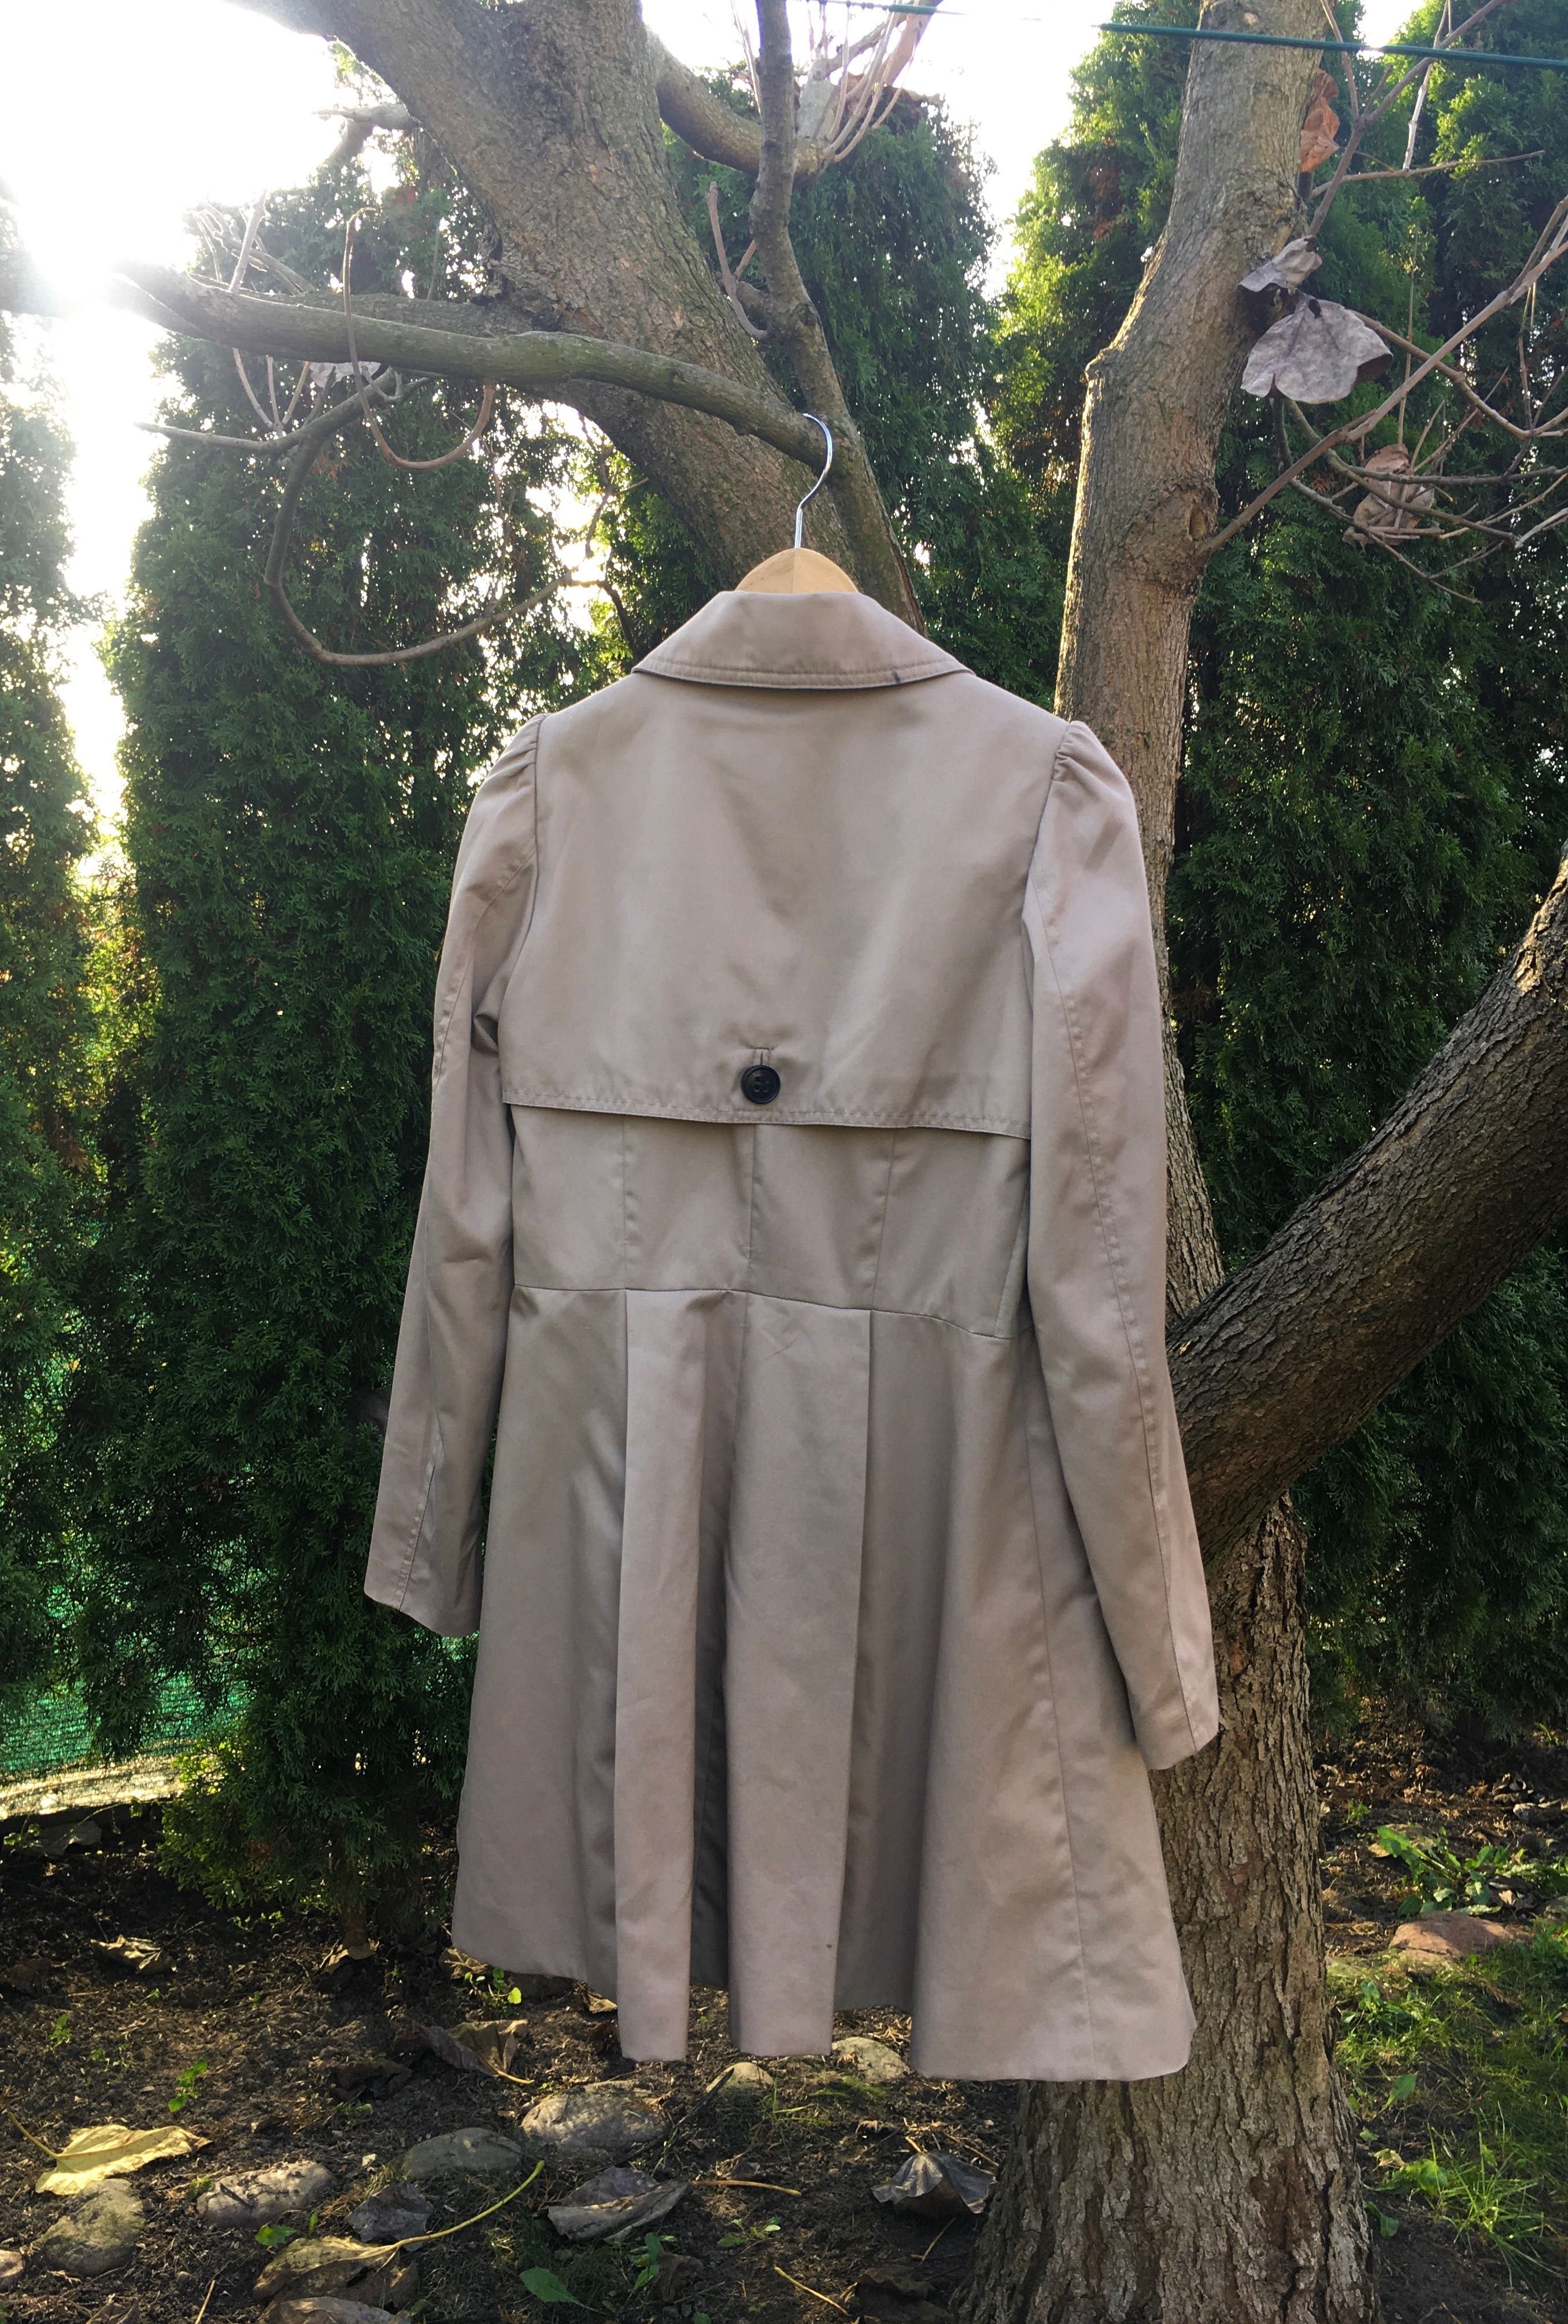 Prochowiec/trench/coat beż/beżowy/taupe/nude/beige H&M 34/36/38 XS/S/M